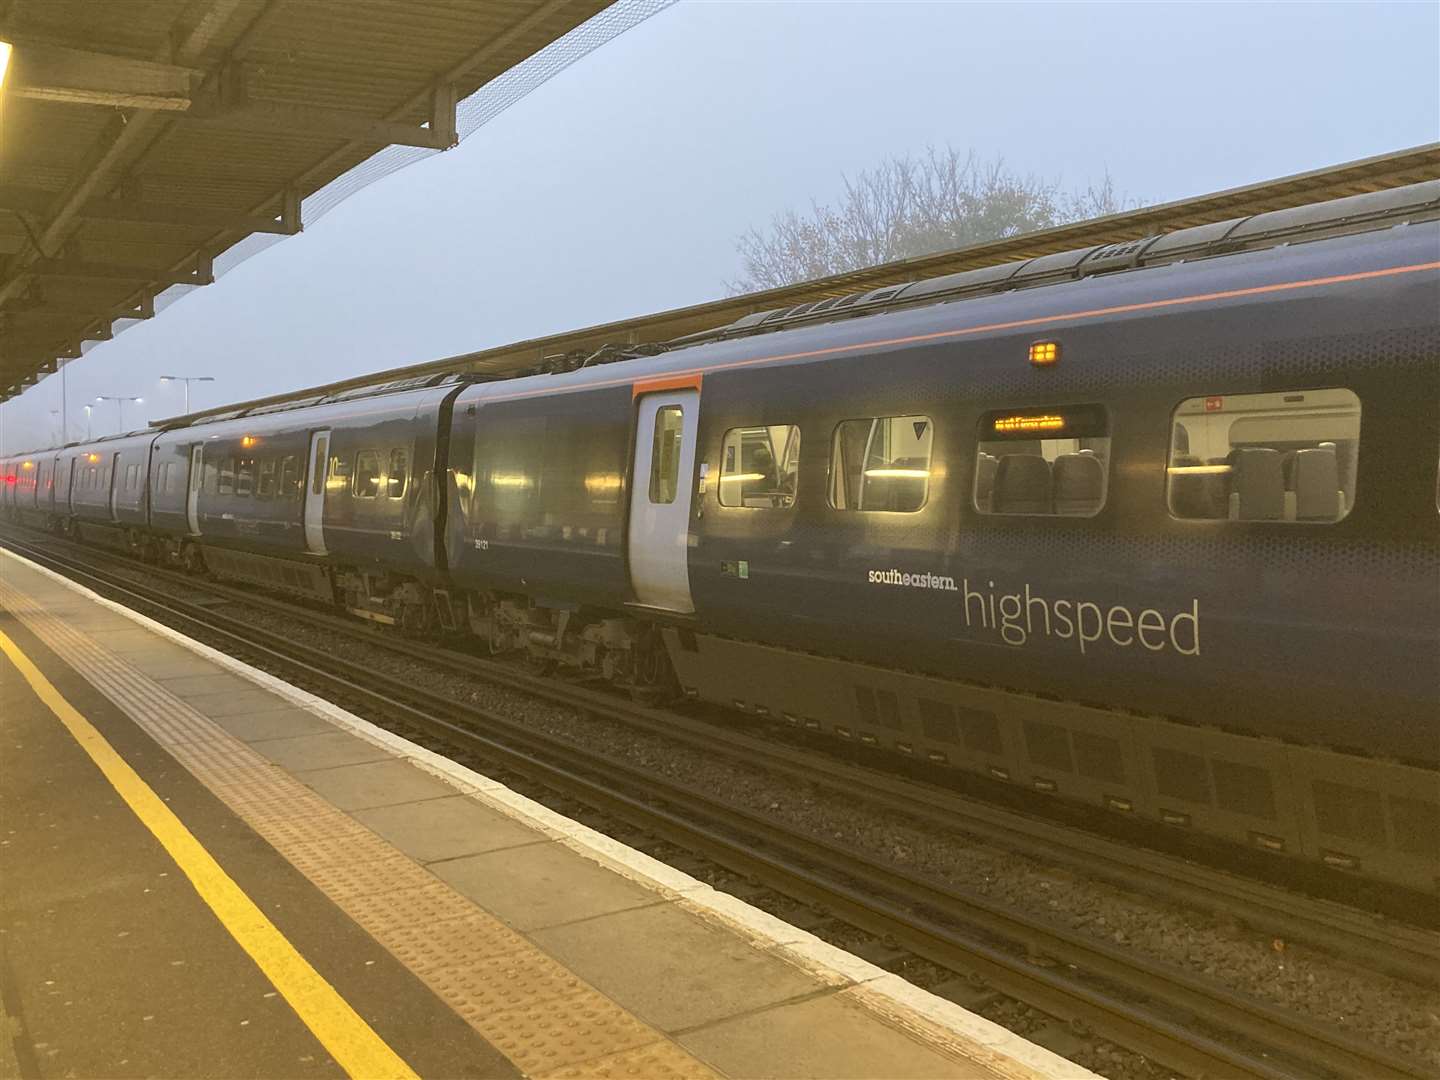 Southeastern services across Kent have been impacted. Stock photo